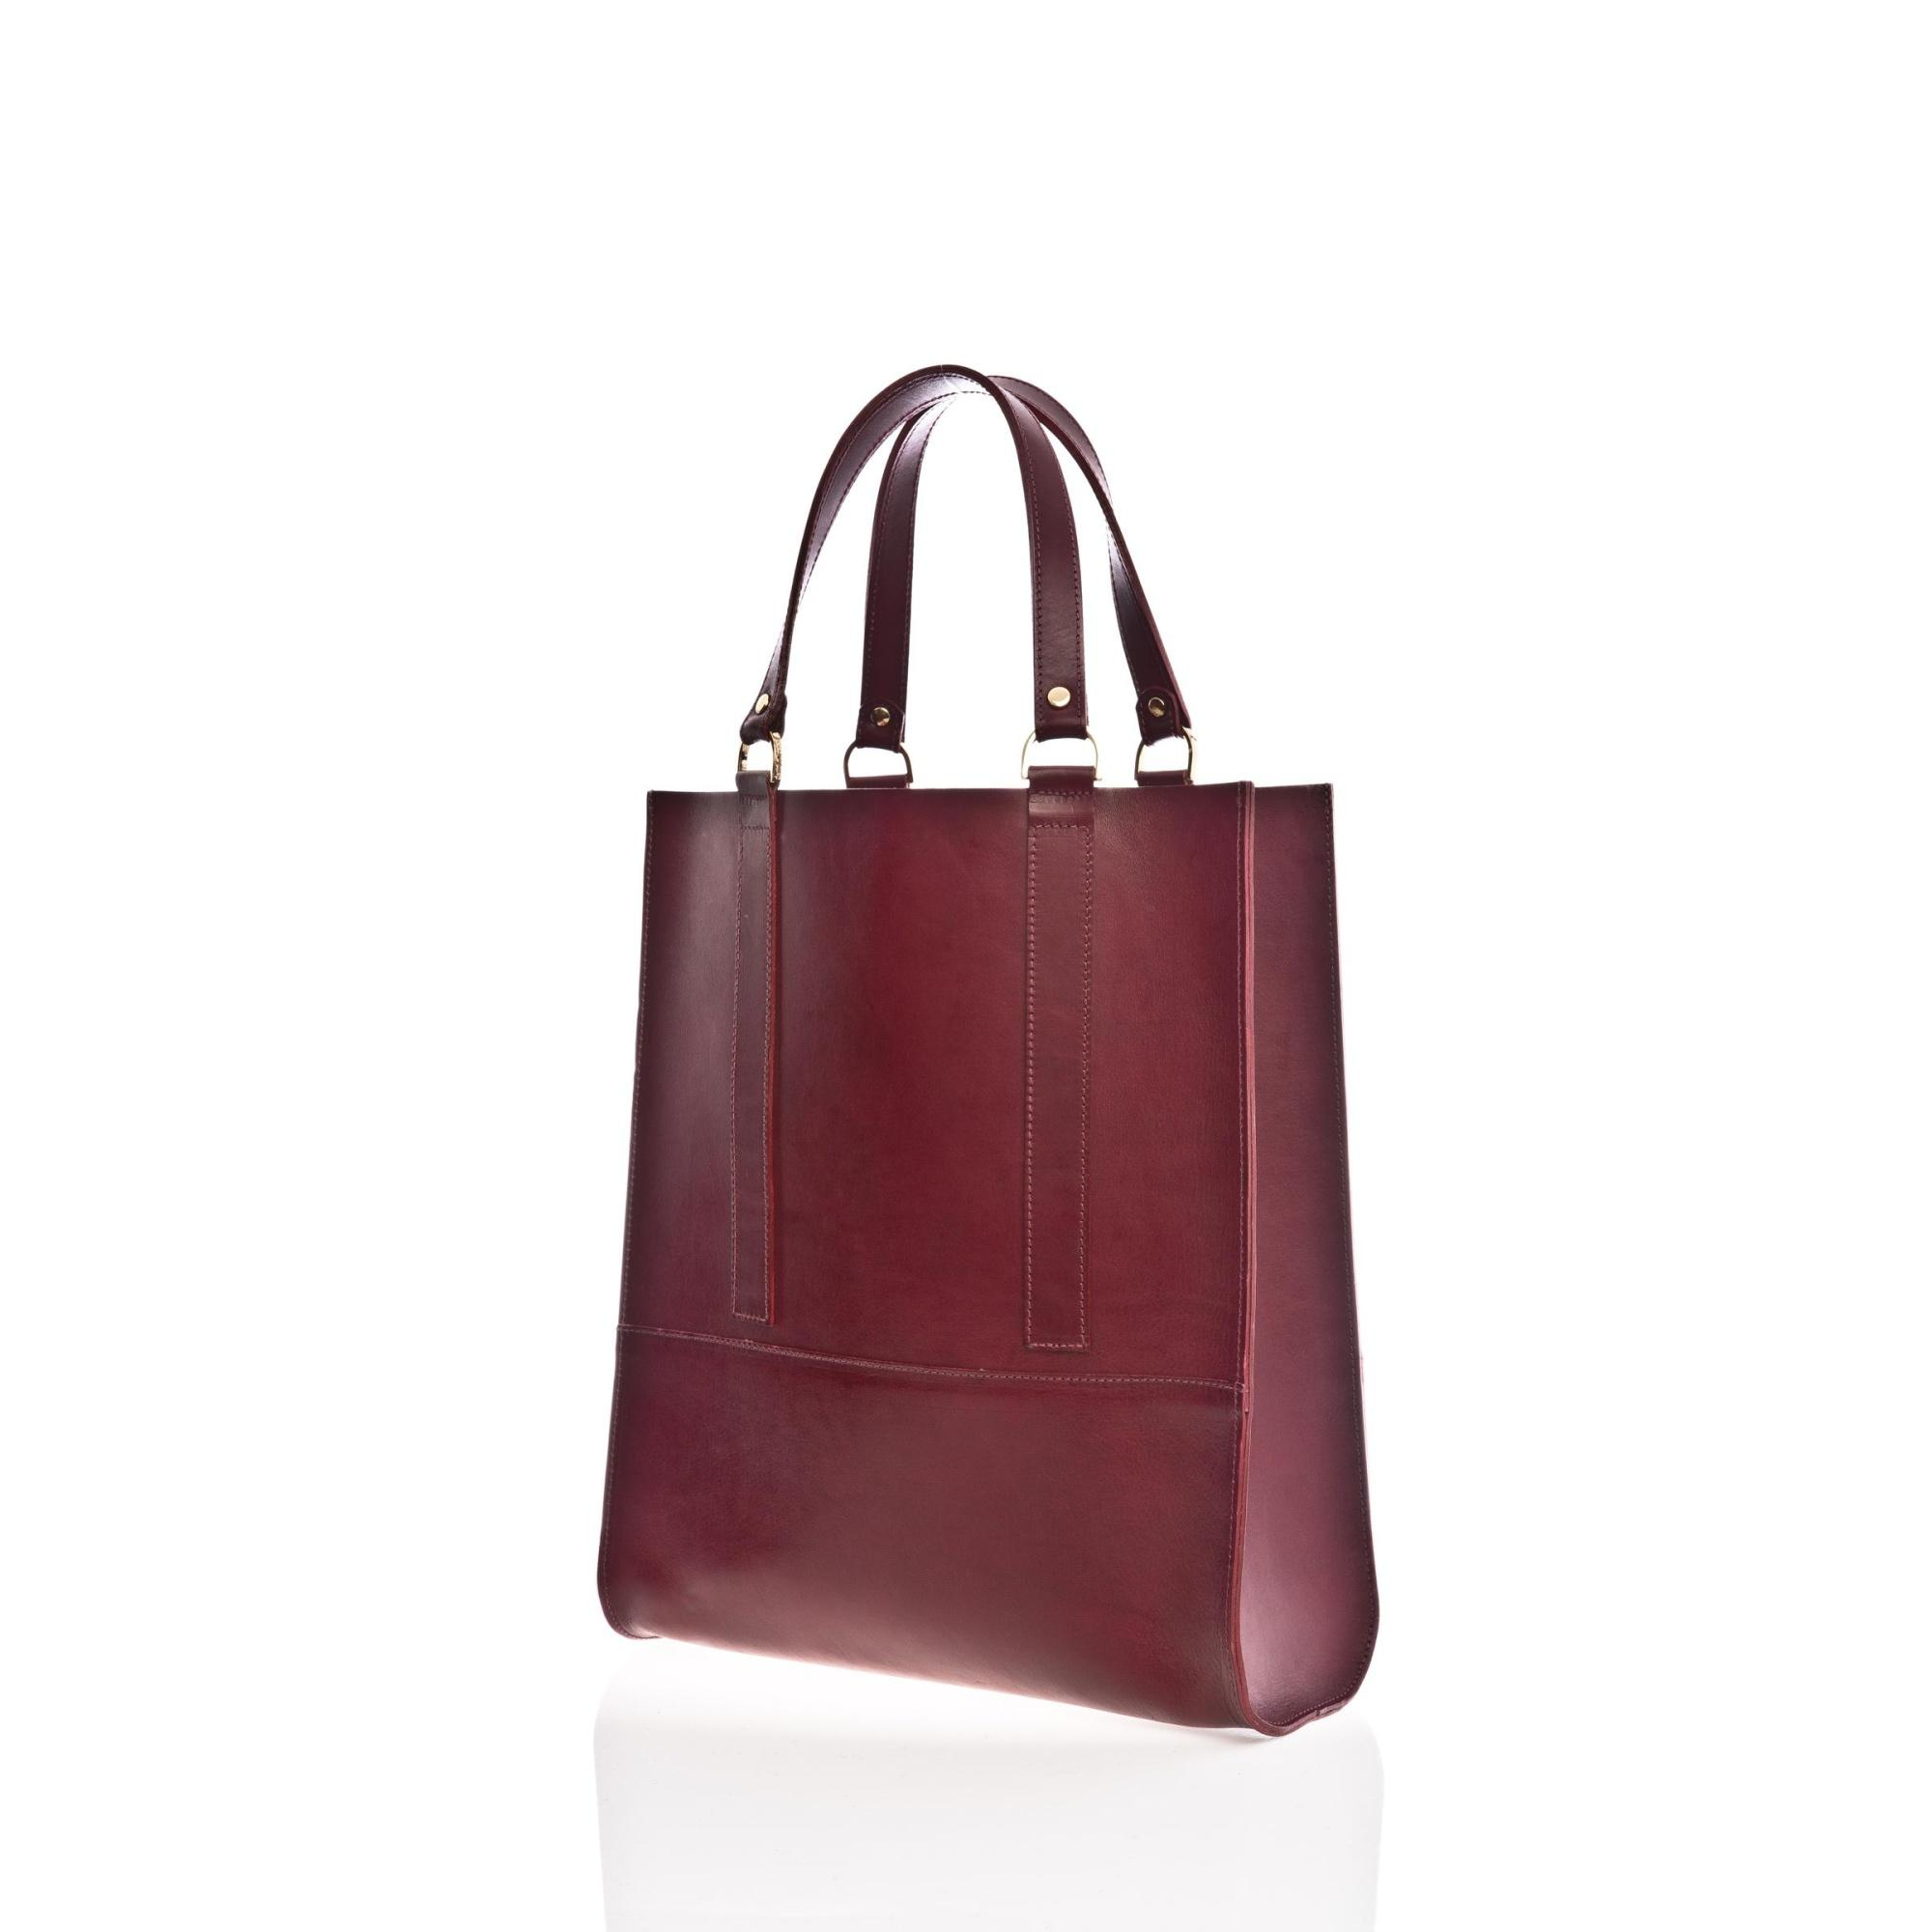 Danielle foster Kelly Burgundy Leather Tote Bag in Purple | Lyst